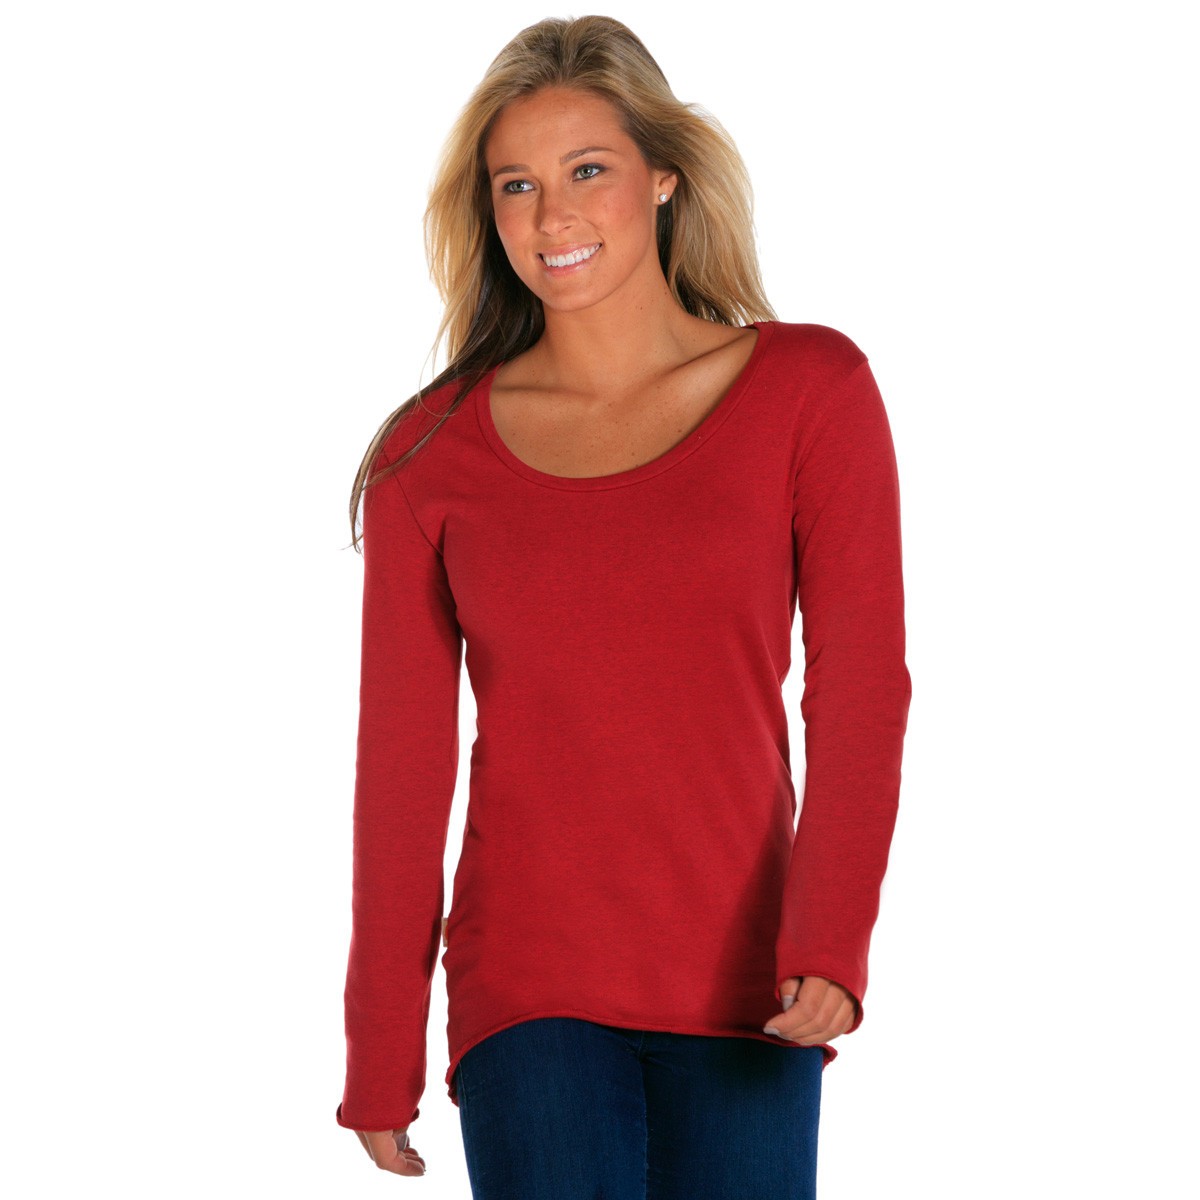 TNB-Womens-Heather-Red-Scoop-front